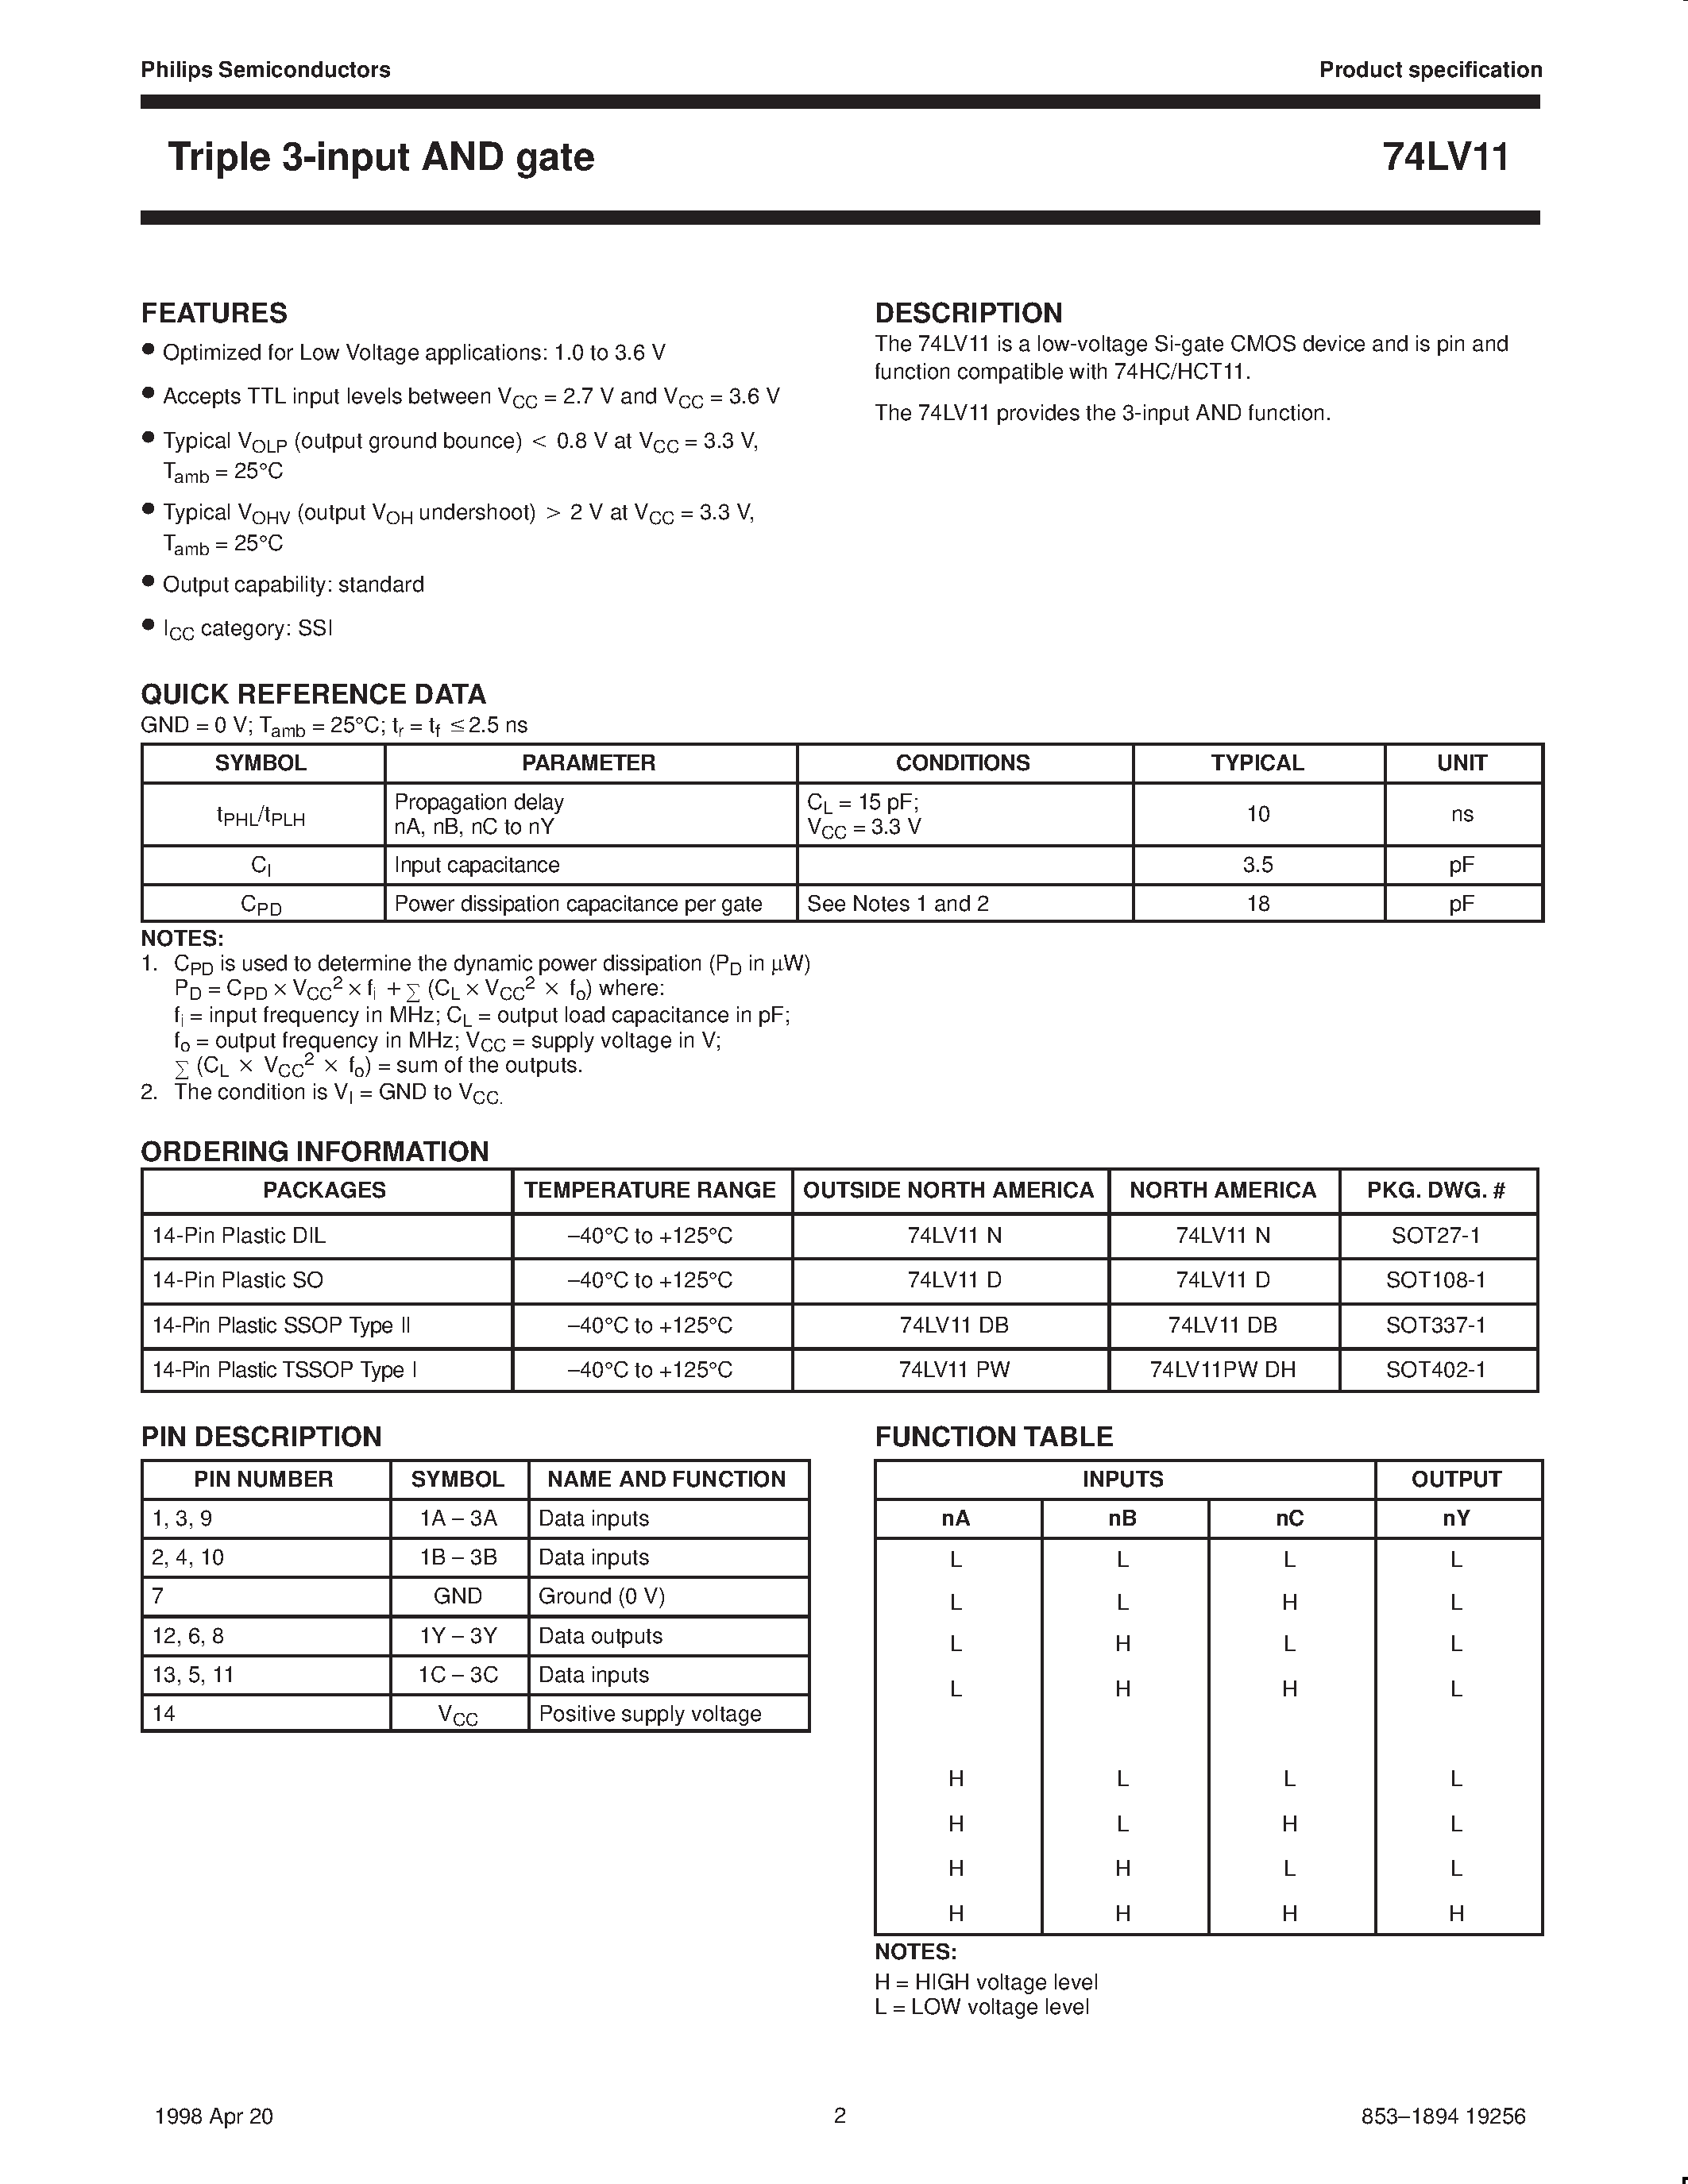 Datasheet 74LV11 - Triple 3-input AND gate page 2